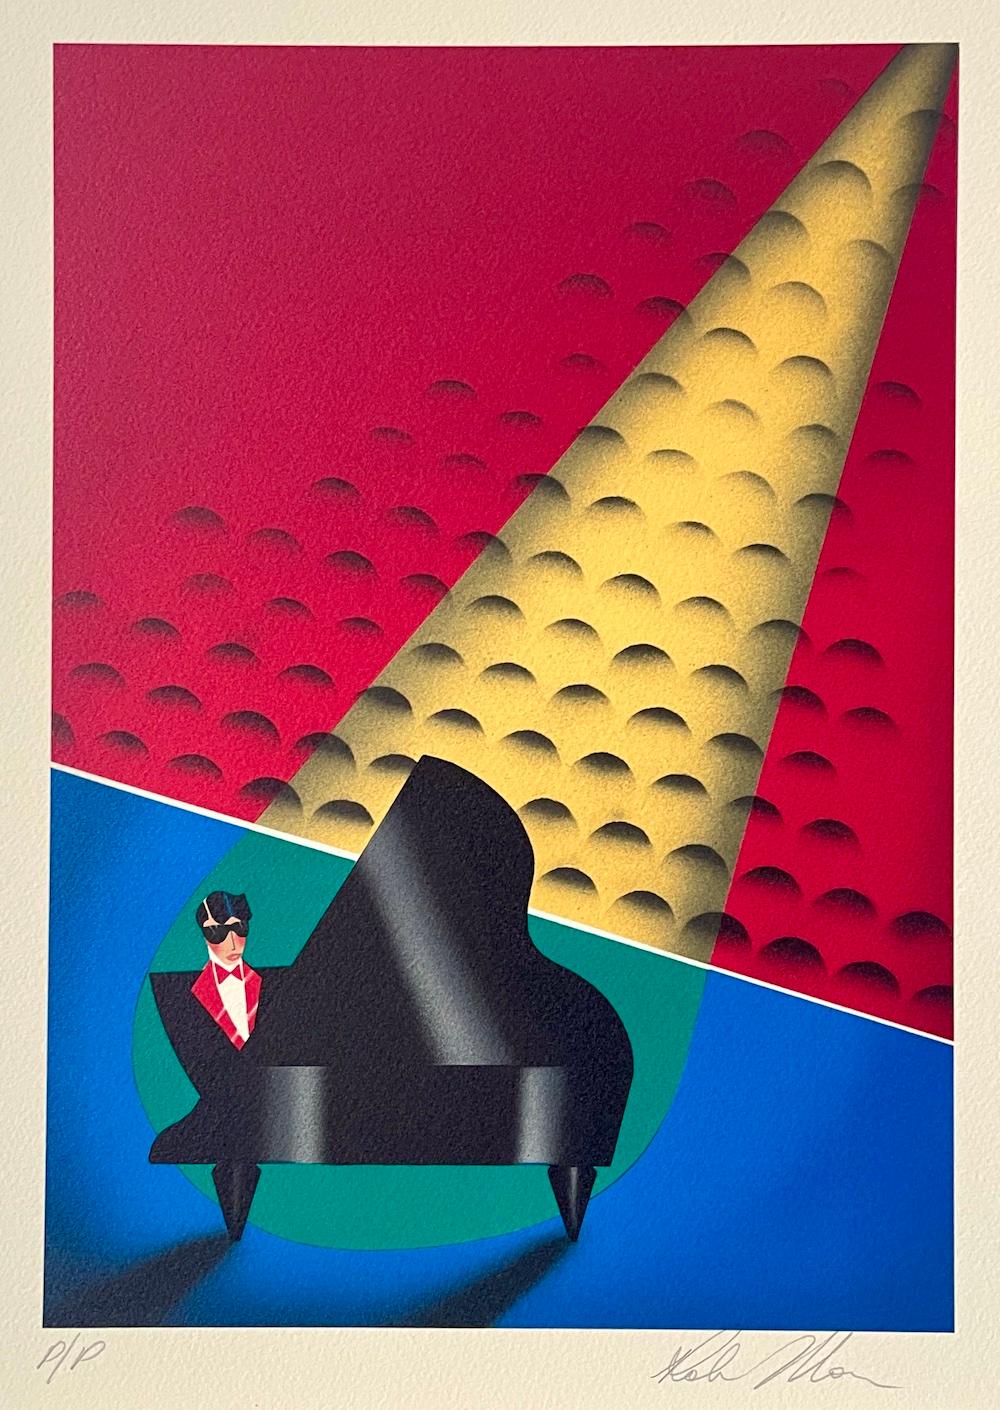 SPOTLIGHT Signed Lithograph, Man in Tux Playing Grand Piano, Art Deco  - Print by Robin Morris